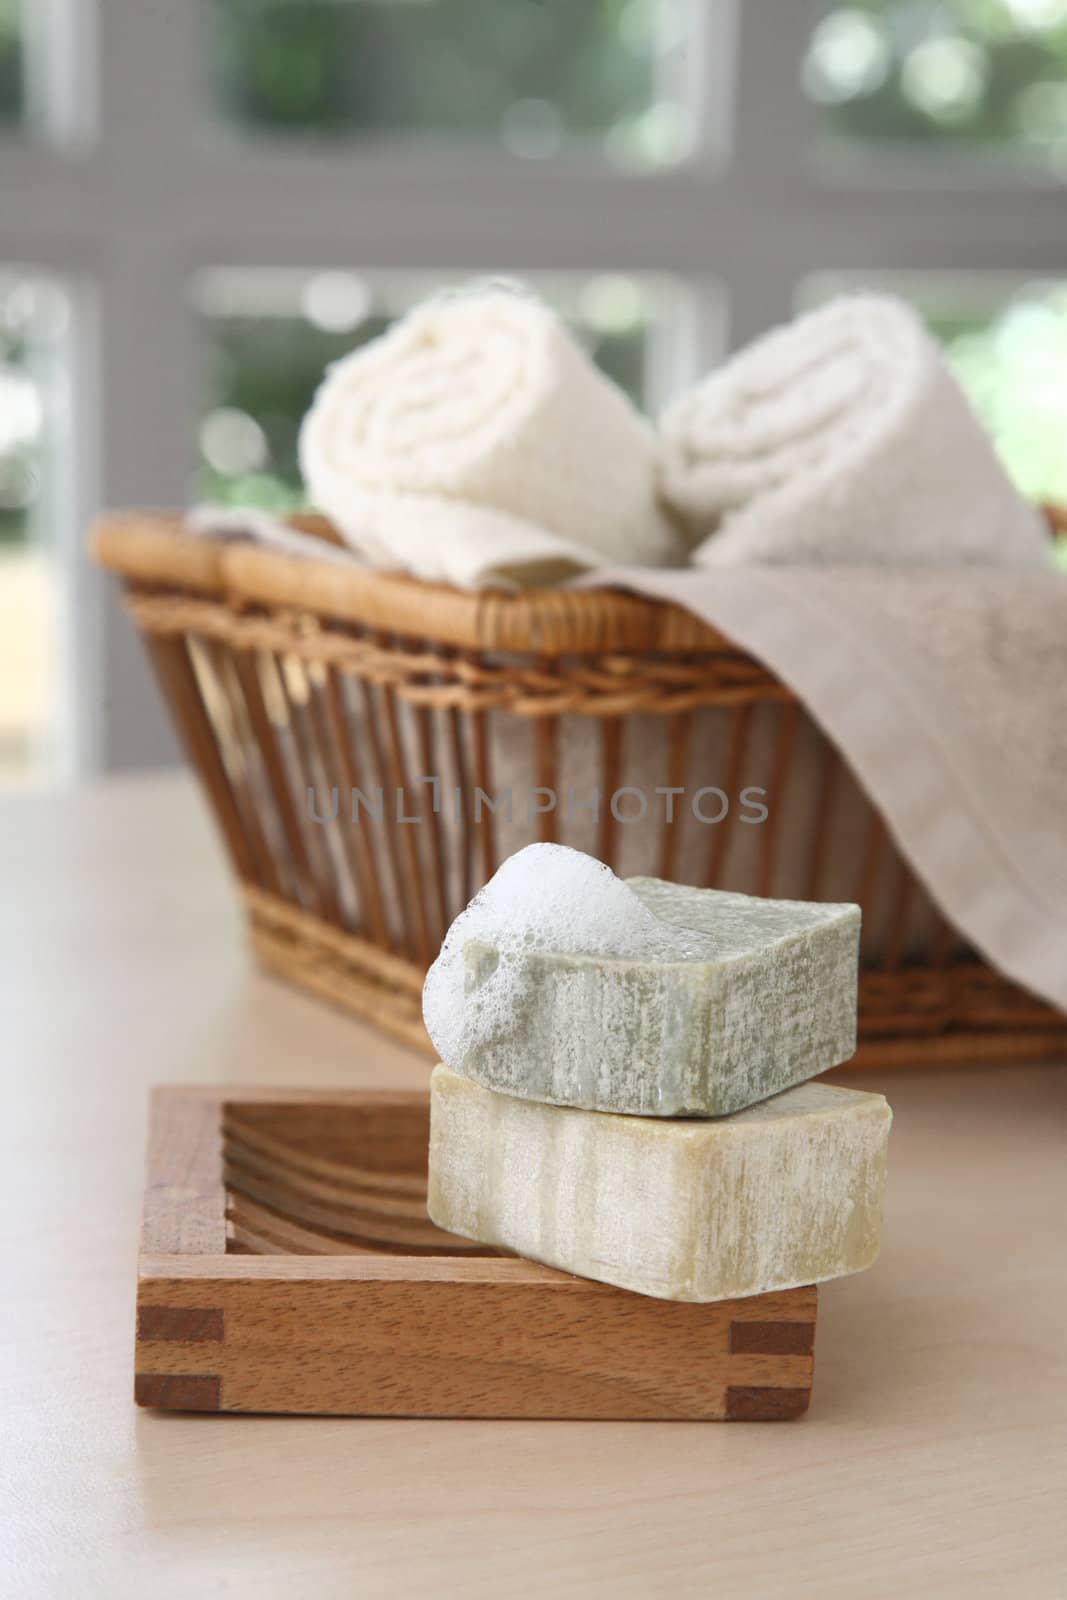 Soaps,towels and boobles with a blurred background